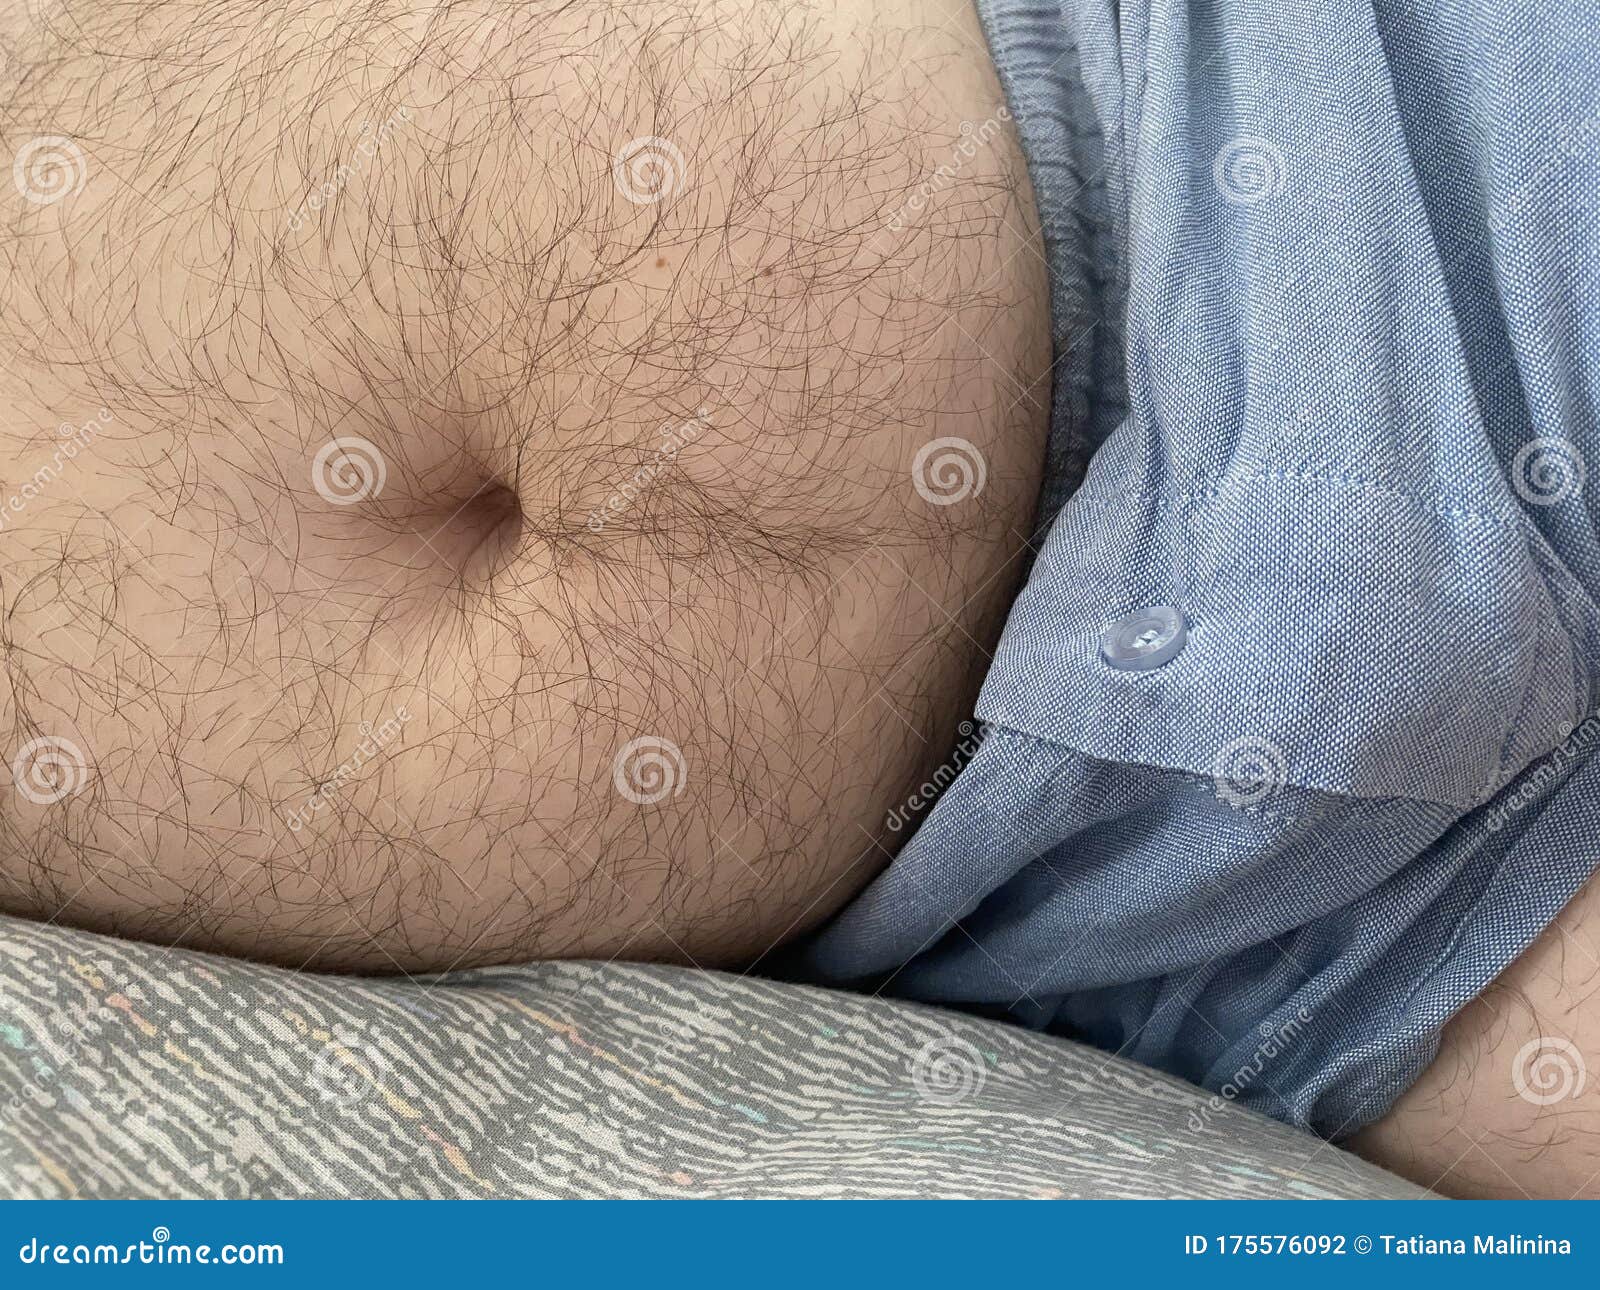 Big hairy belly